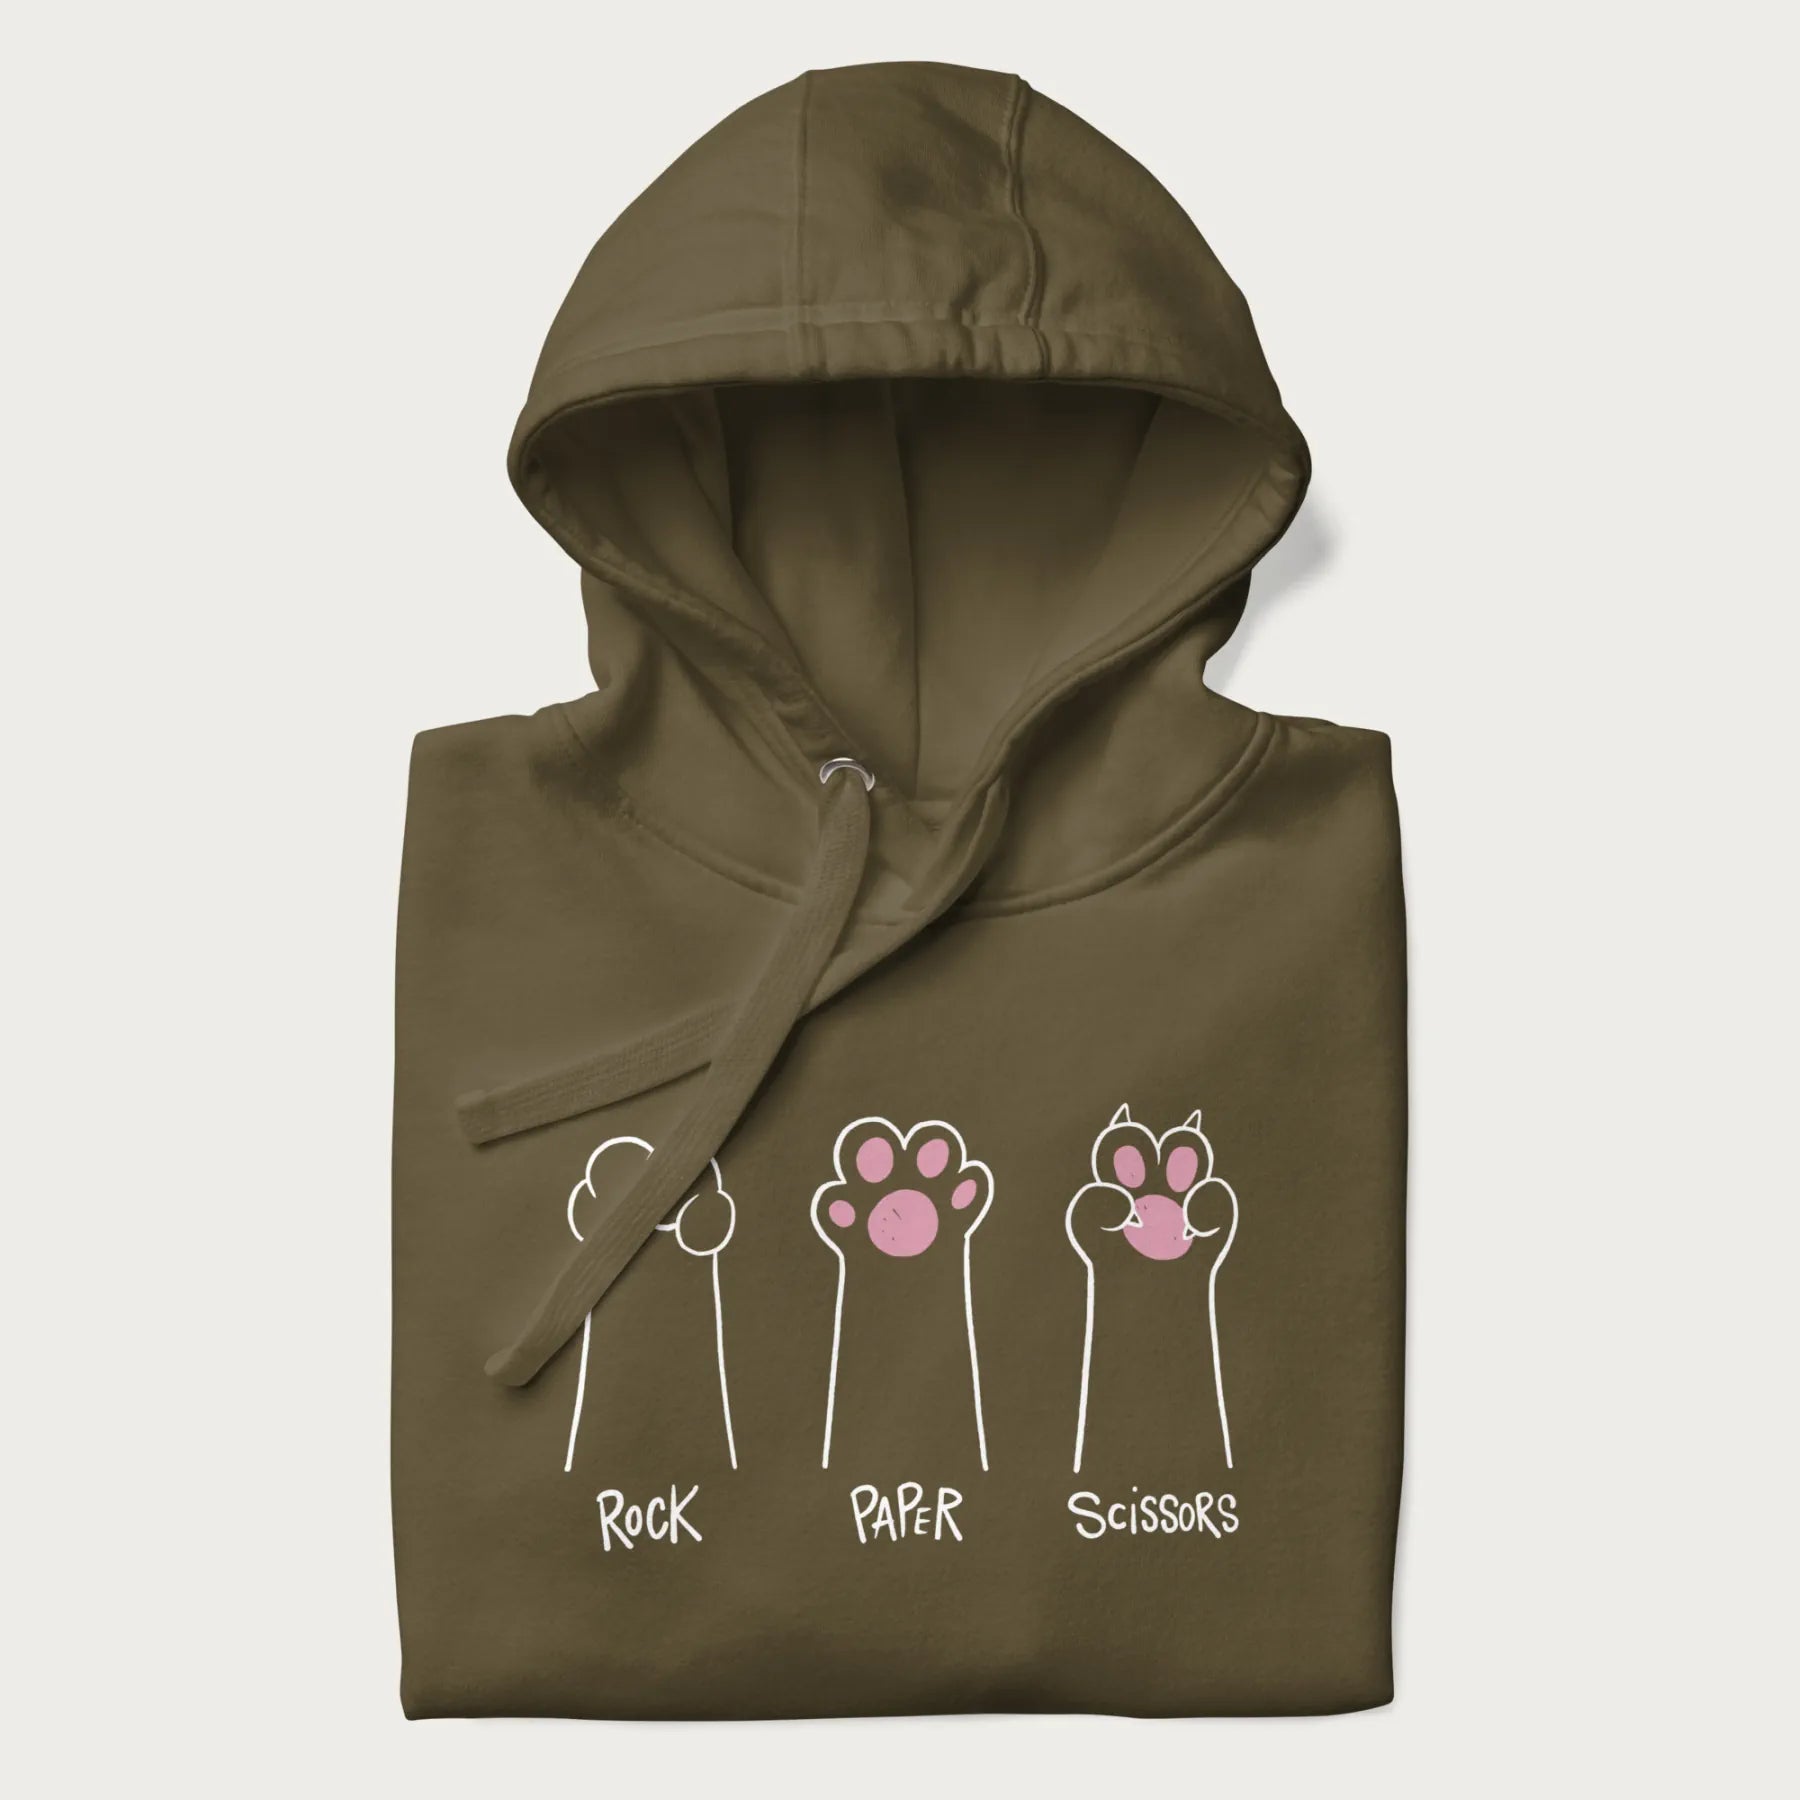 Folded military green hoodie with graphic of cat paws playing rock-paper-scissors.